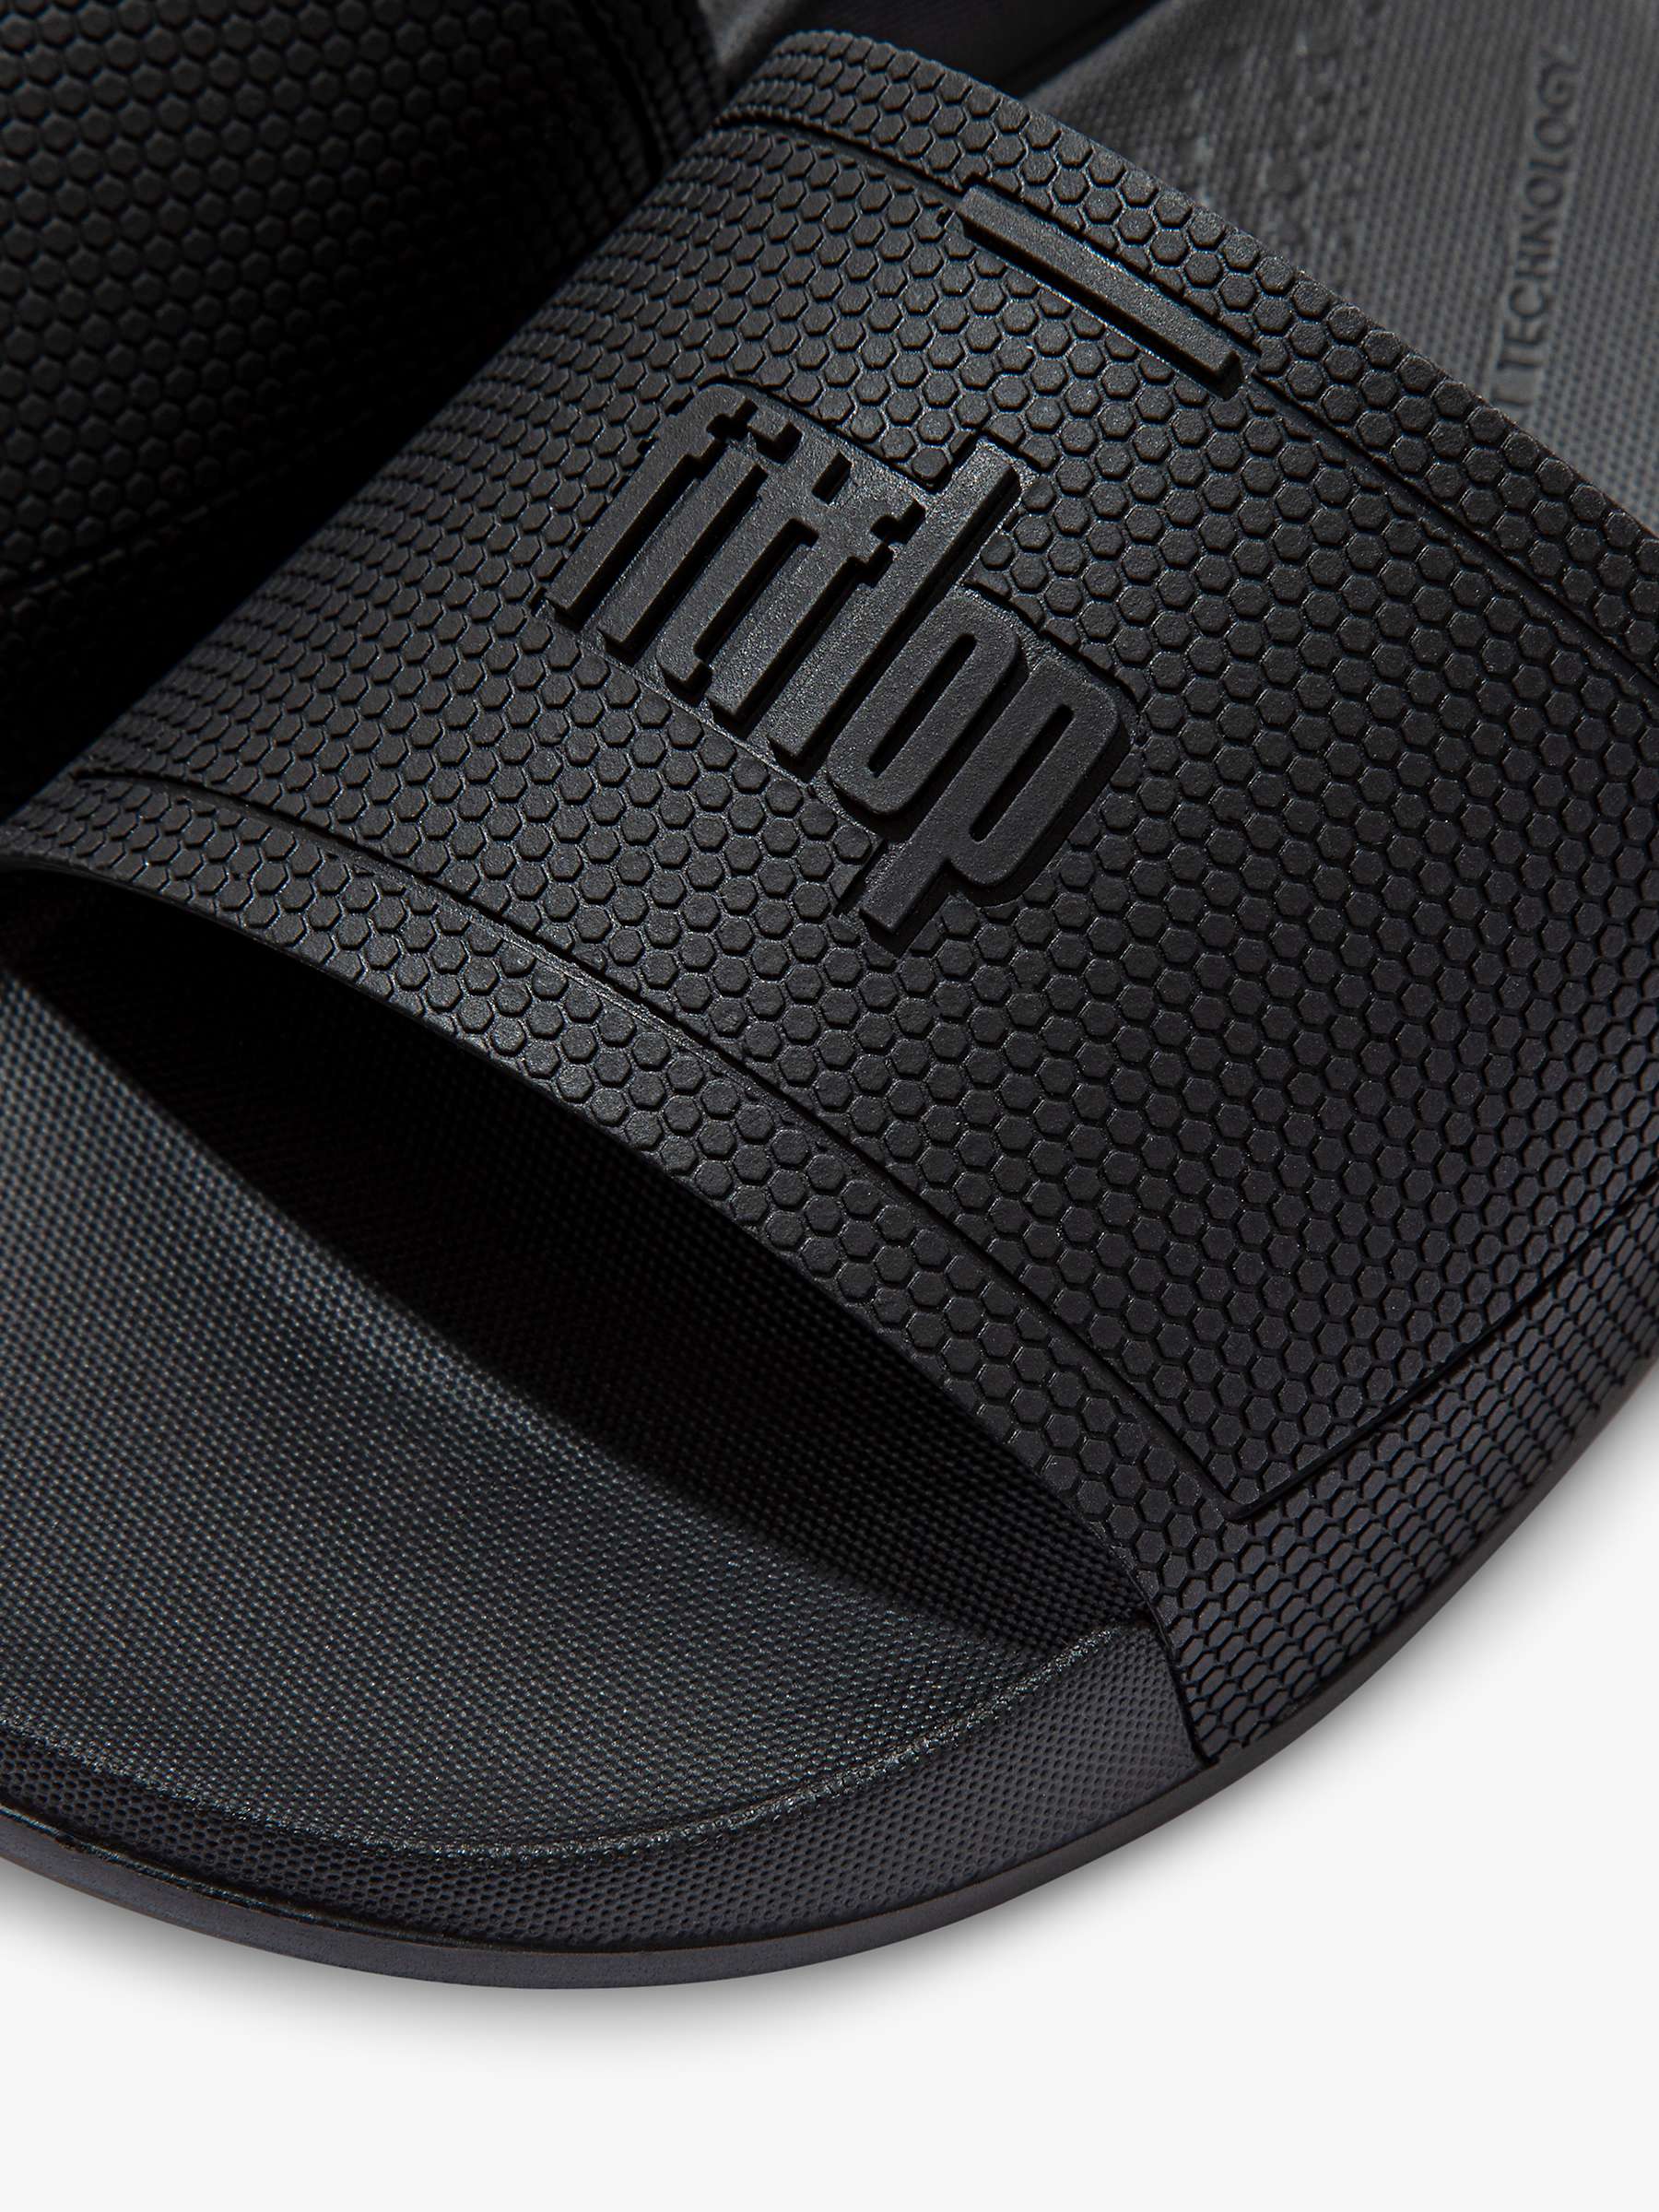 FitFlop IQushion Sliders, Black at John Lewis & Partners